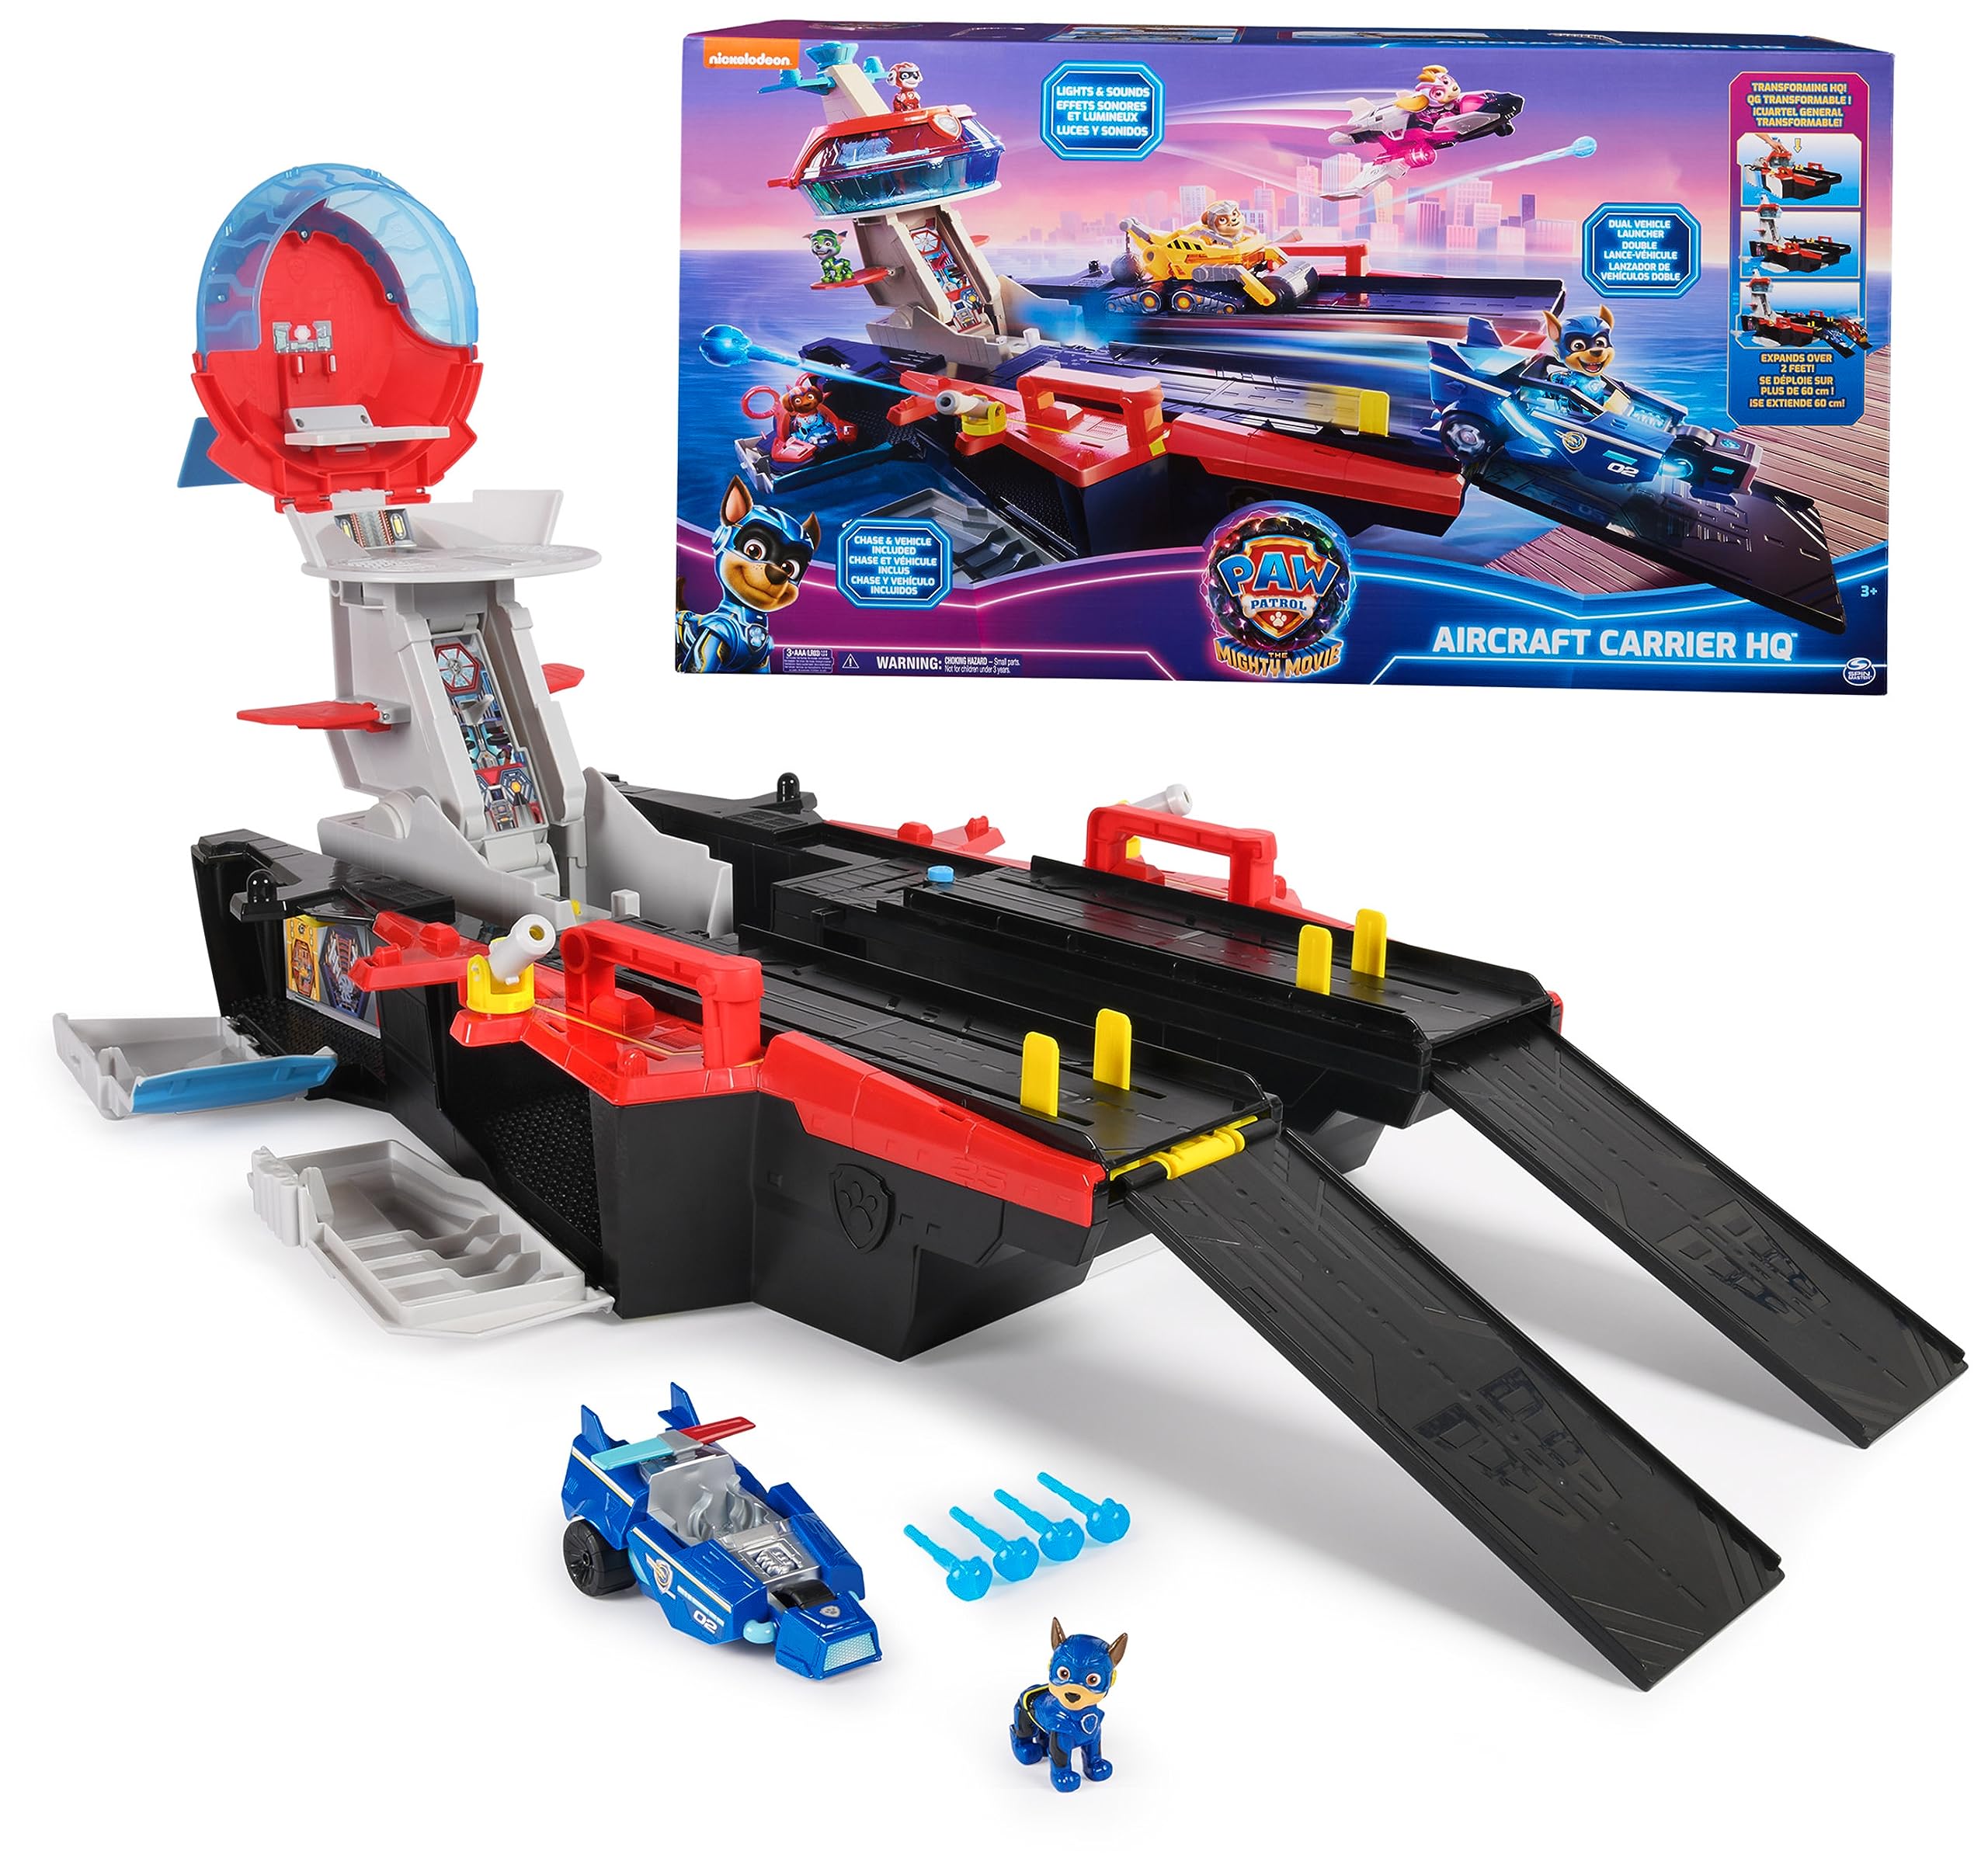 Nickelodeon Paw Patrol The Mighty Movie: Aircraft Carrier HQ w/ Chase Action Figure & Mighty Pups Cruiser $52 + Free Shipping